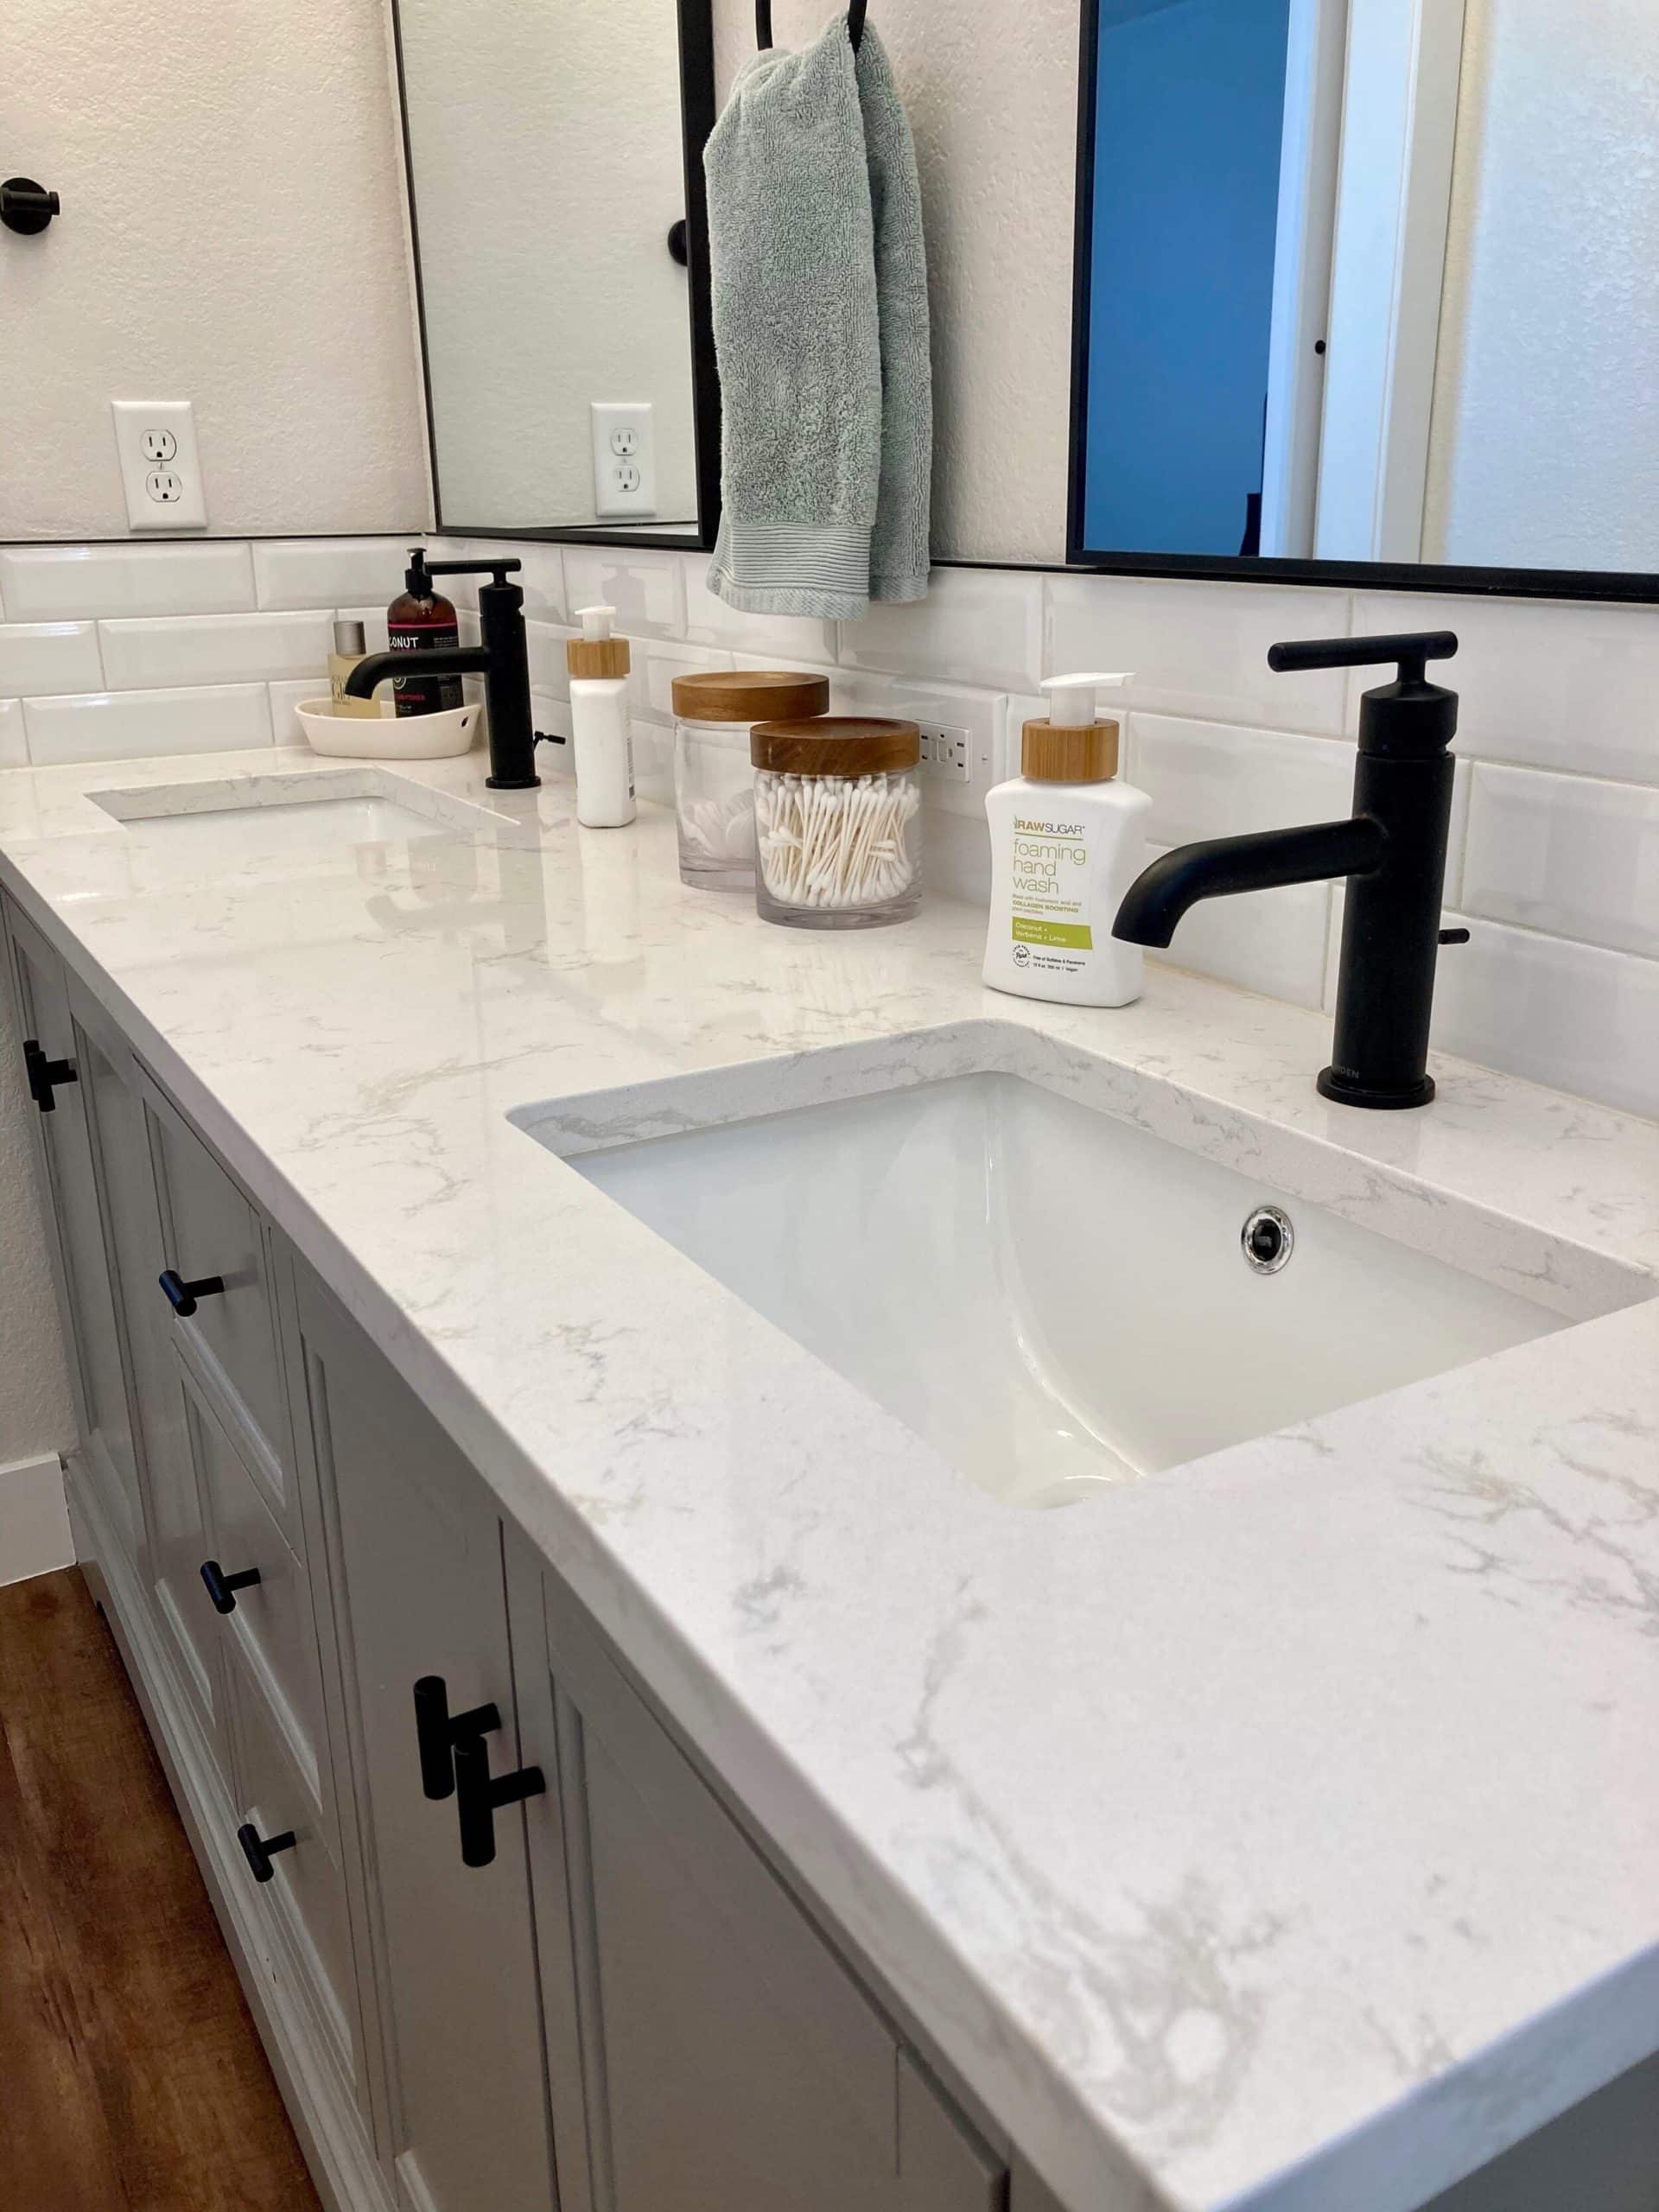 Close-up of a double bathroom vanity with white marble counters and black faucets